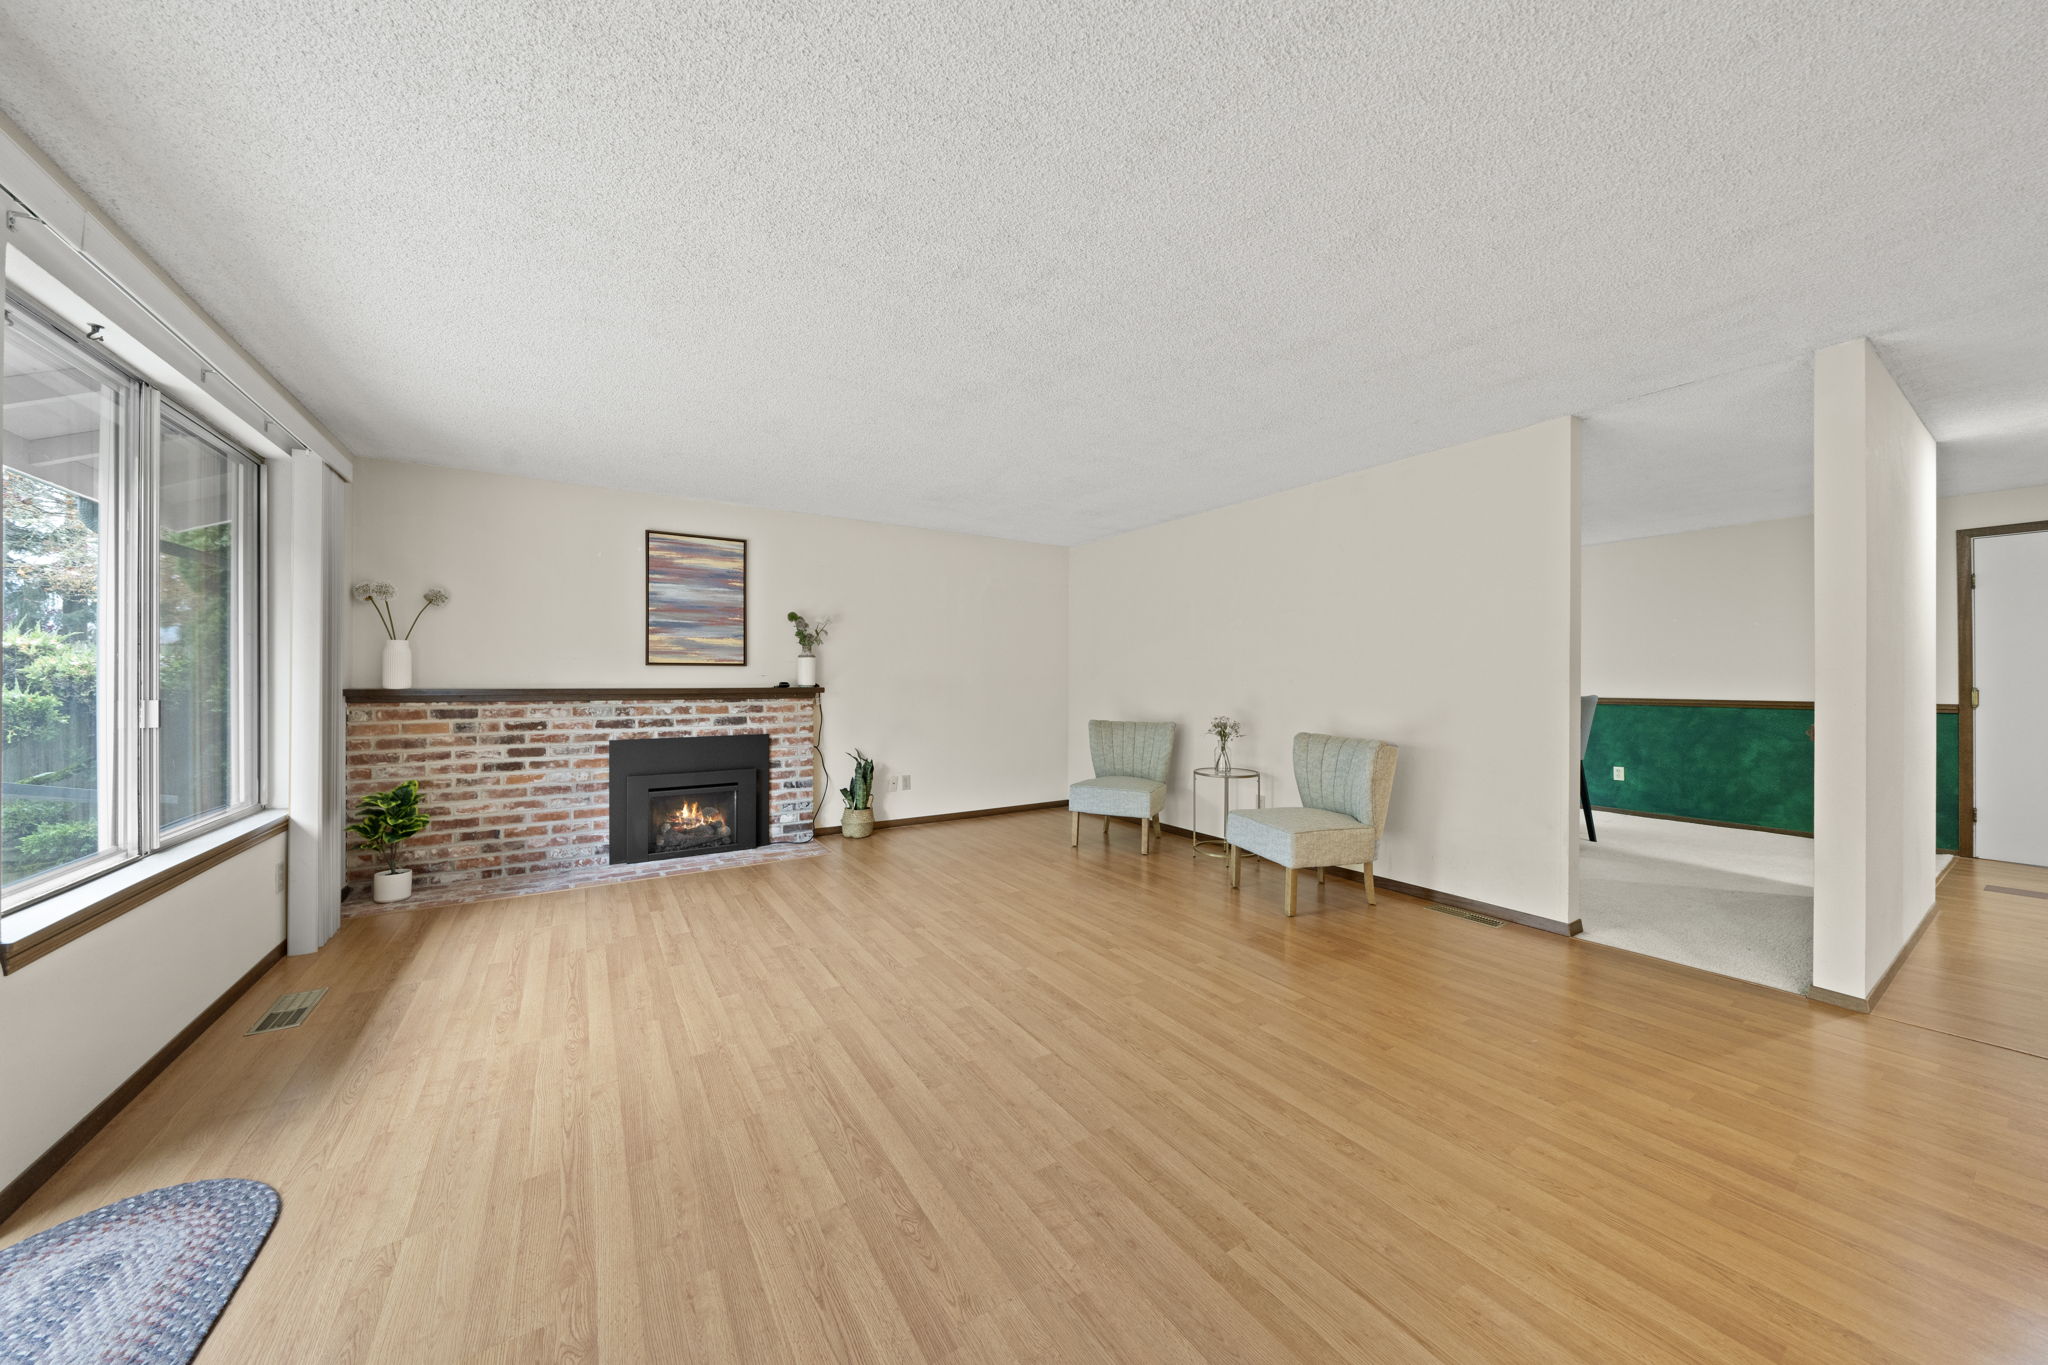 The family room features a second fireplace!